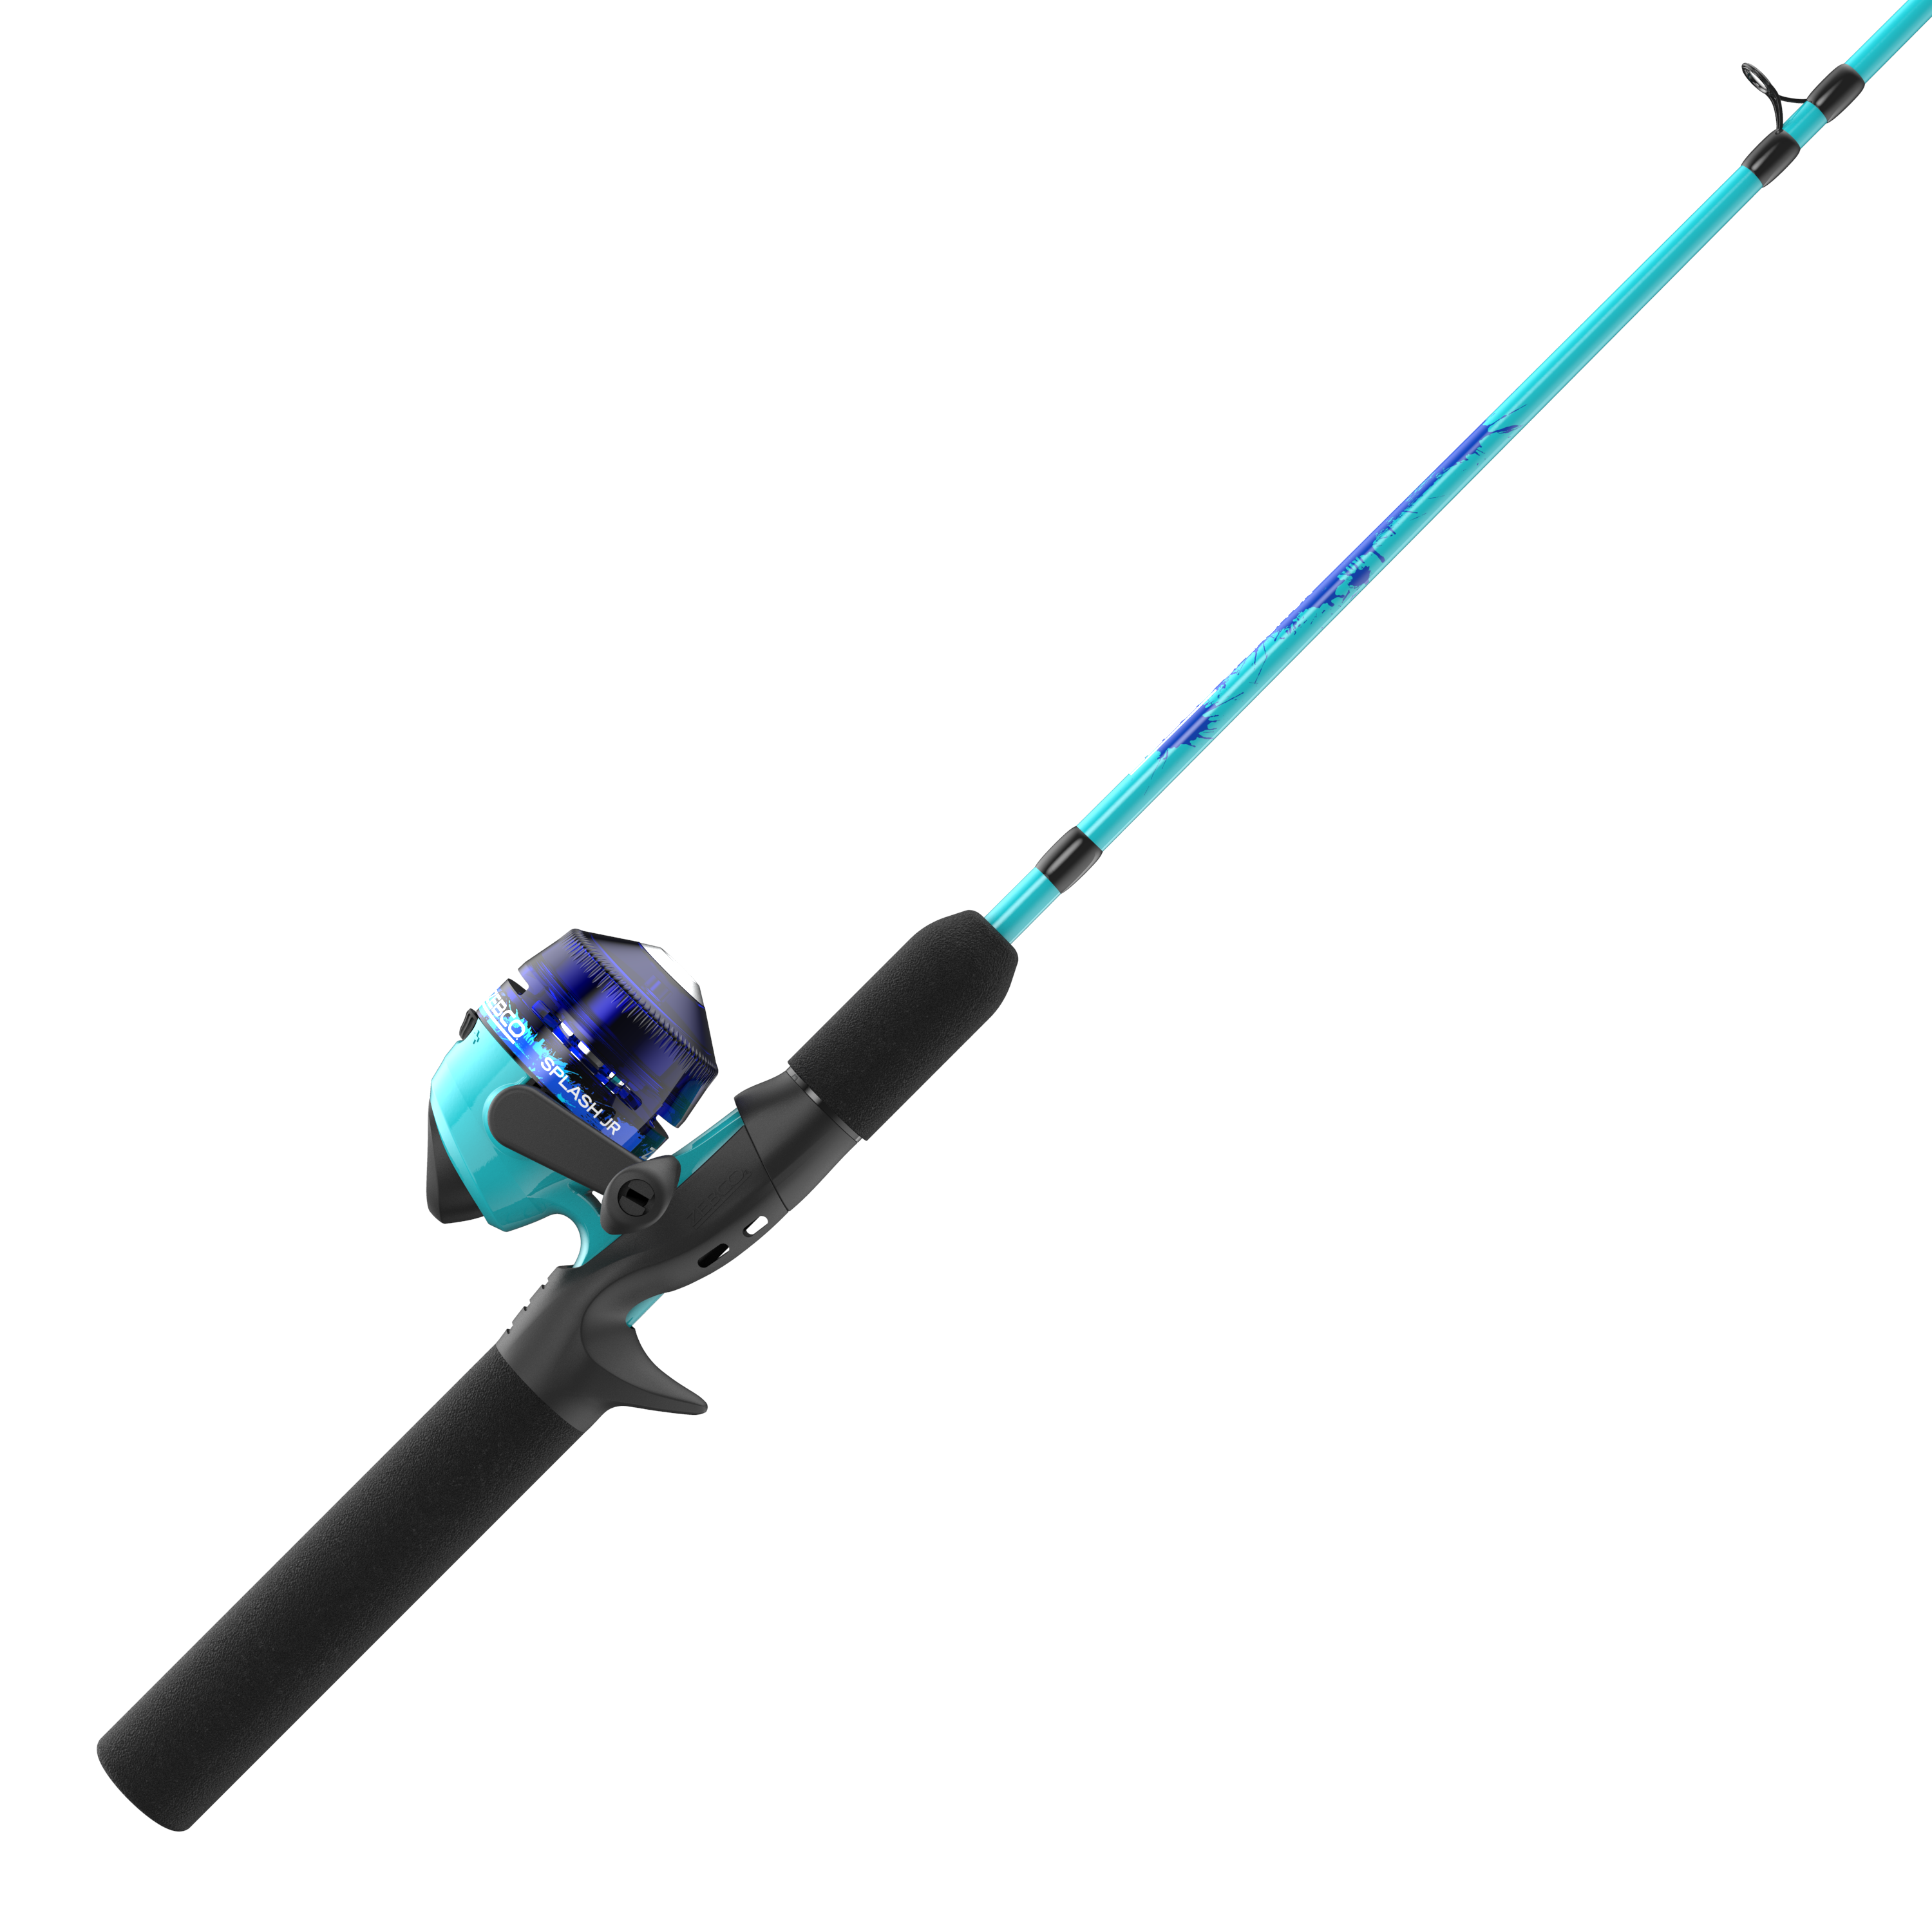 New Youth 29.5 Alvin and the Chipmunks Rod & Reel Fishing Pole